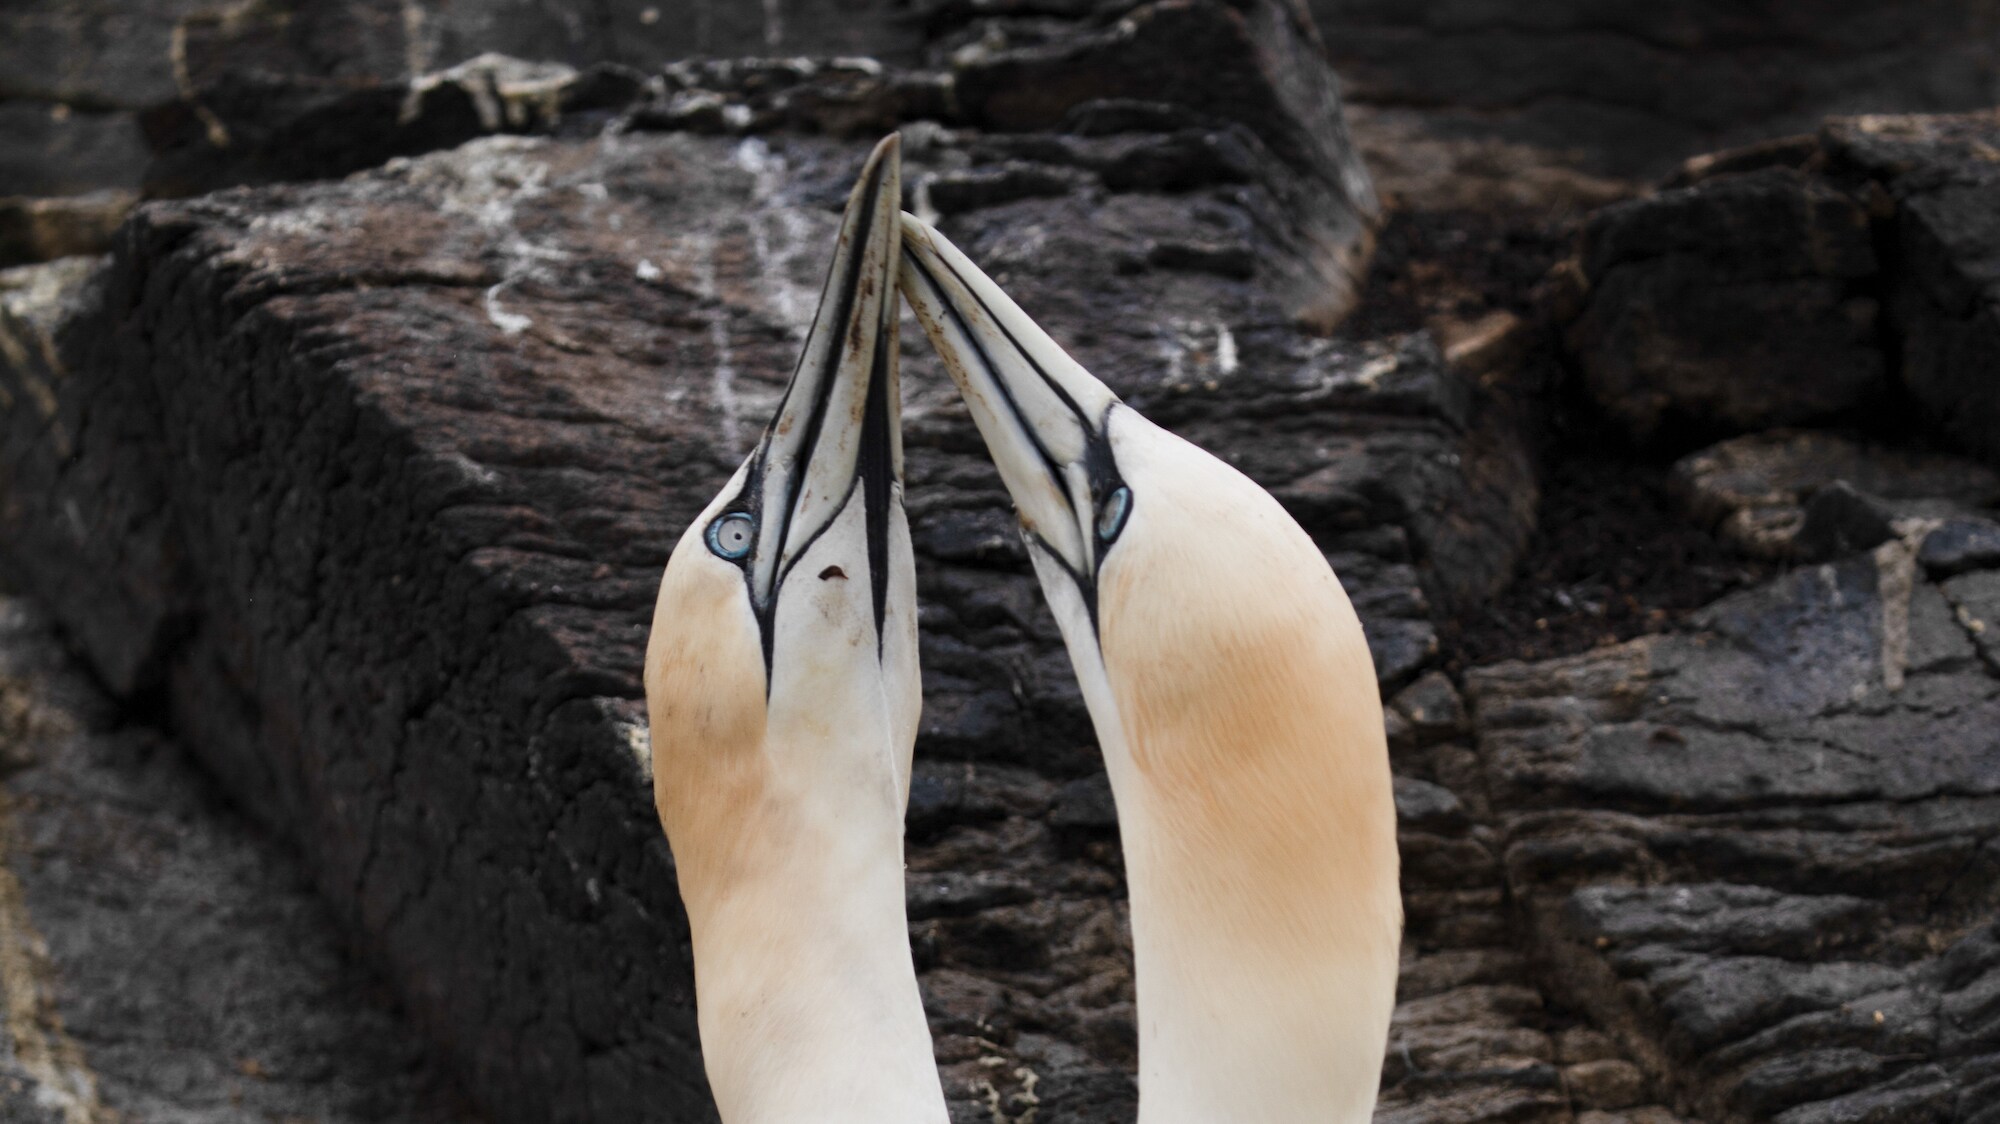 Northern gannets greet each other with a ritualistic beak rubbing.  (National Geographic for Disney+/Eloisa Noble)